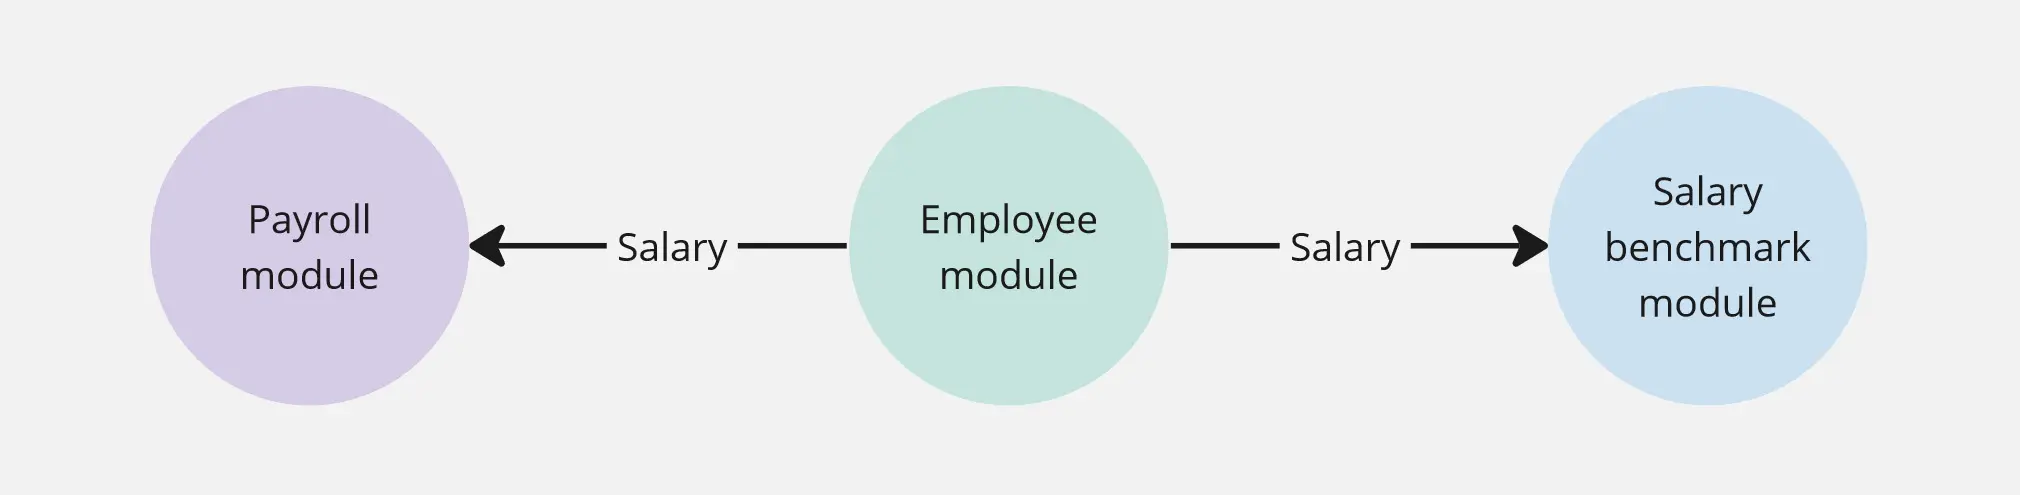 Diagram: Employee module exposes salary to payroll and salary benchmarking modules